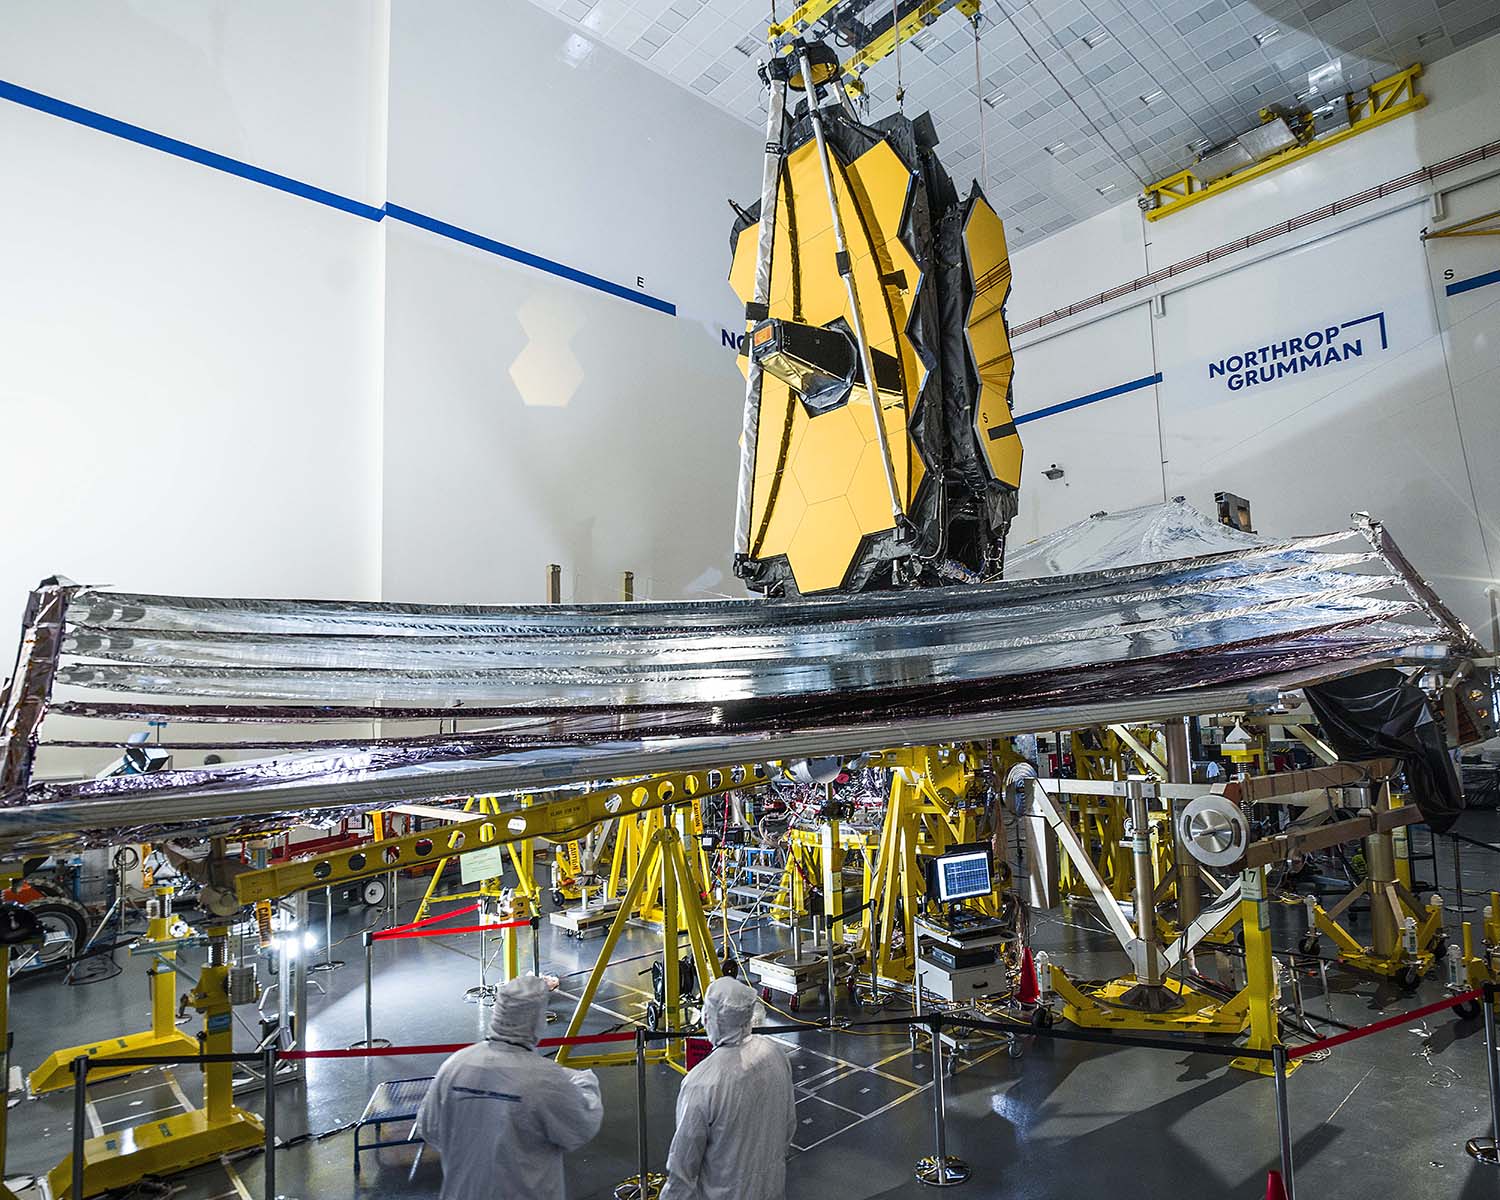 To help ensure success, technicians carefully inspect the James Webb Space Telescope’s sunshield before deployment testing begins, while it is occurring, and perform a full post-test analysis to ensure the observatory is operating as planned.
Credits: NASA/Chris Gunn